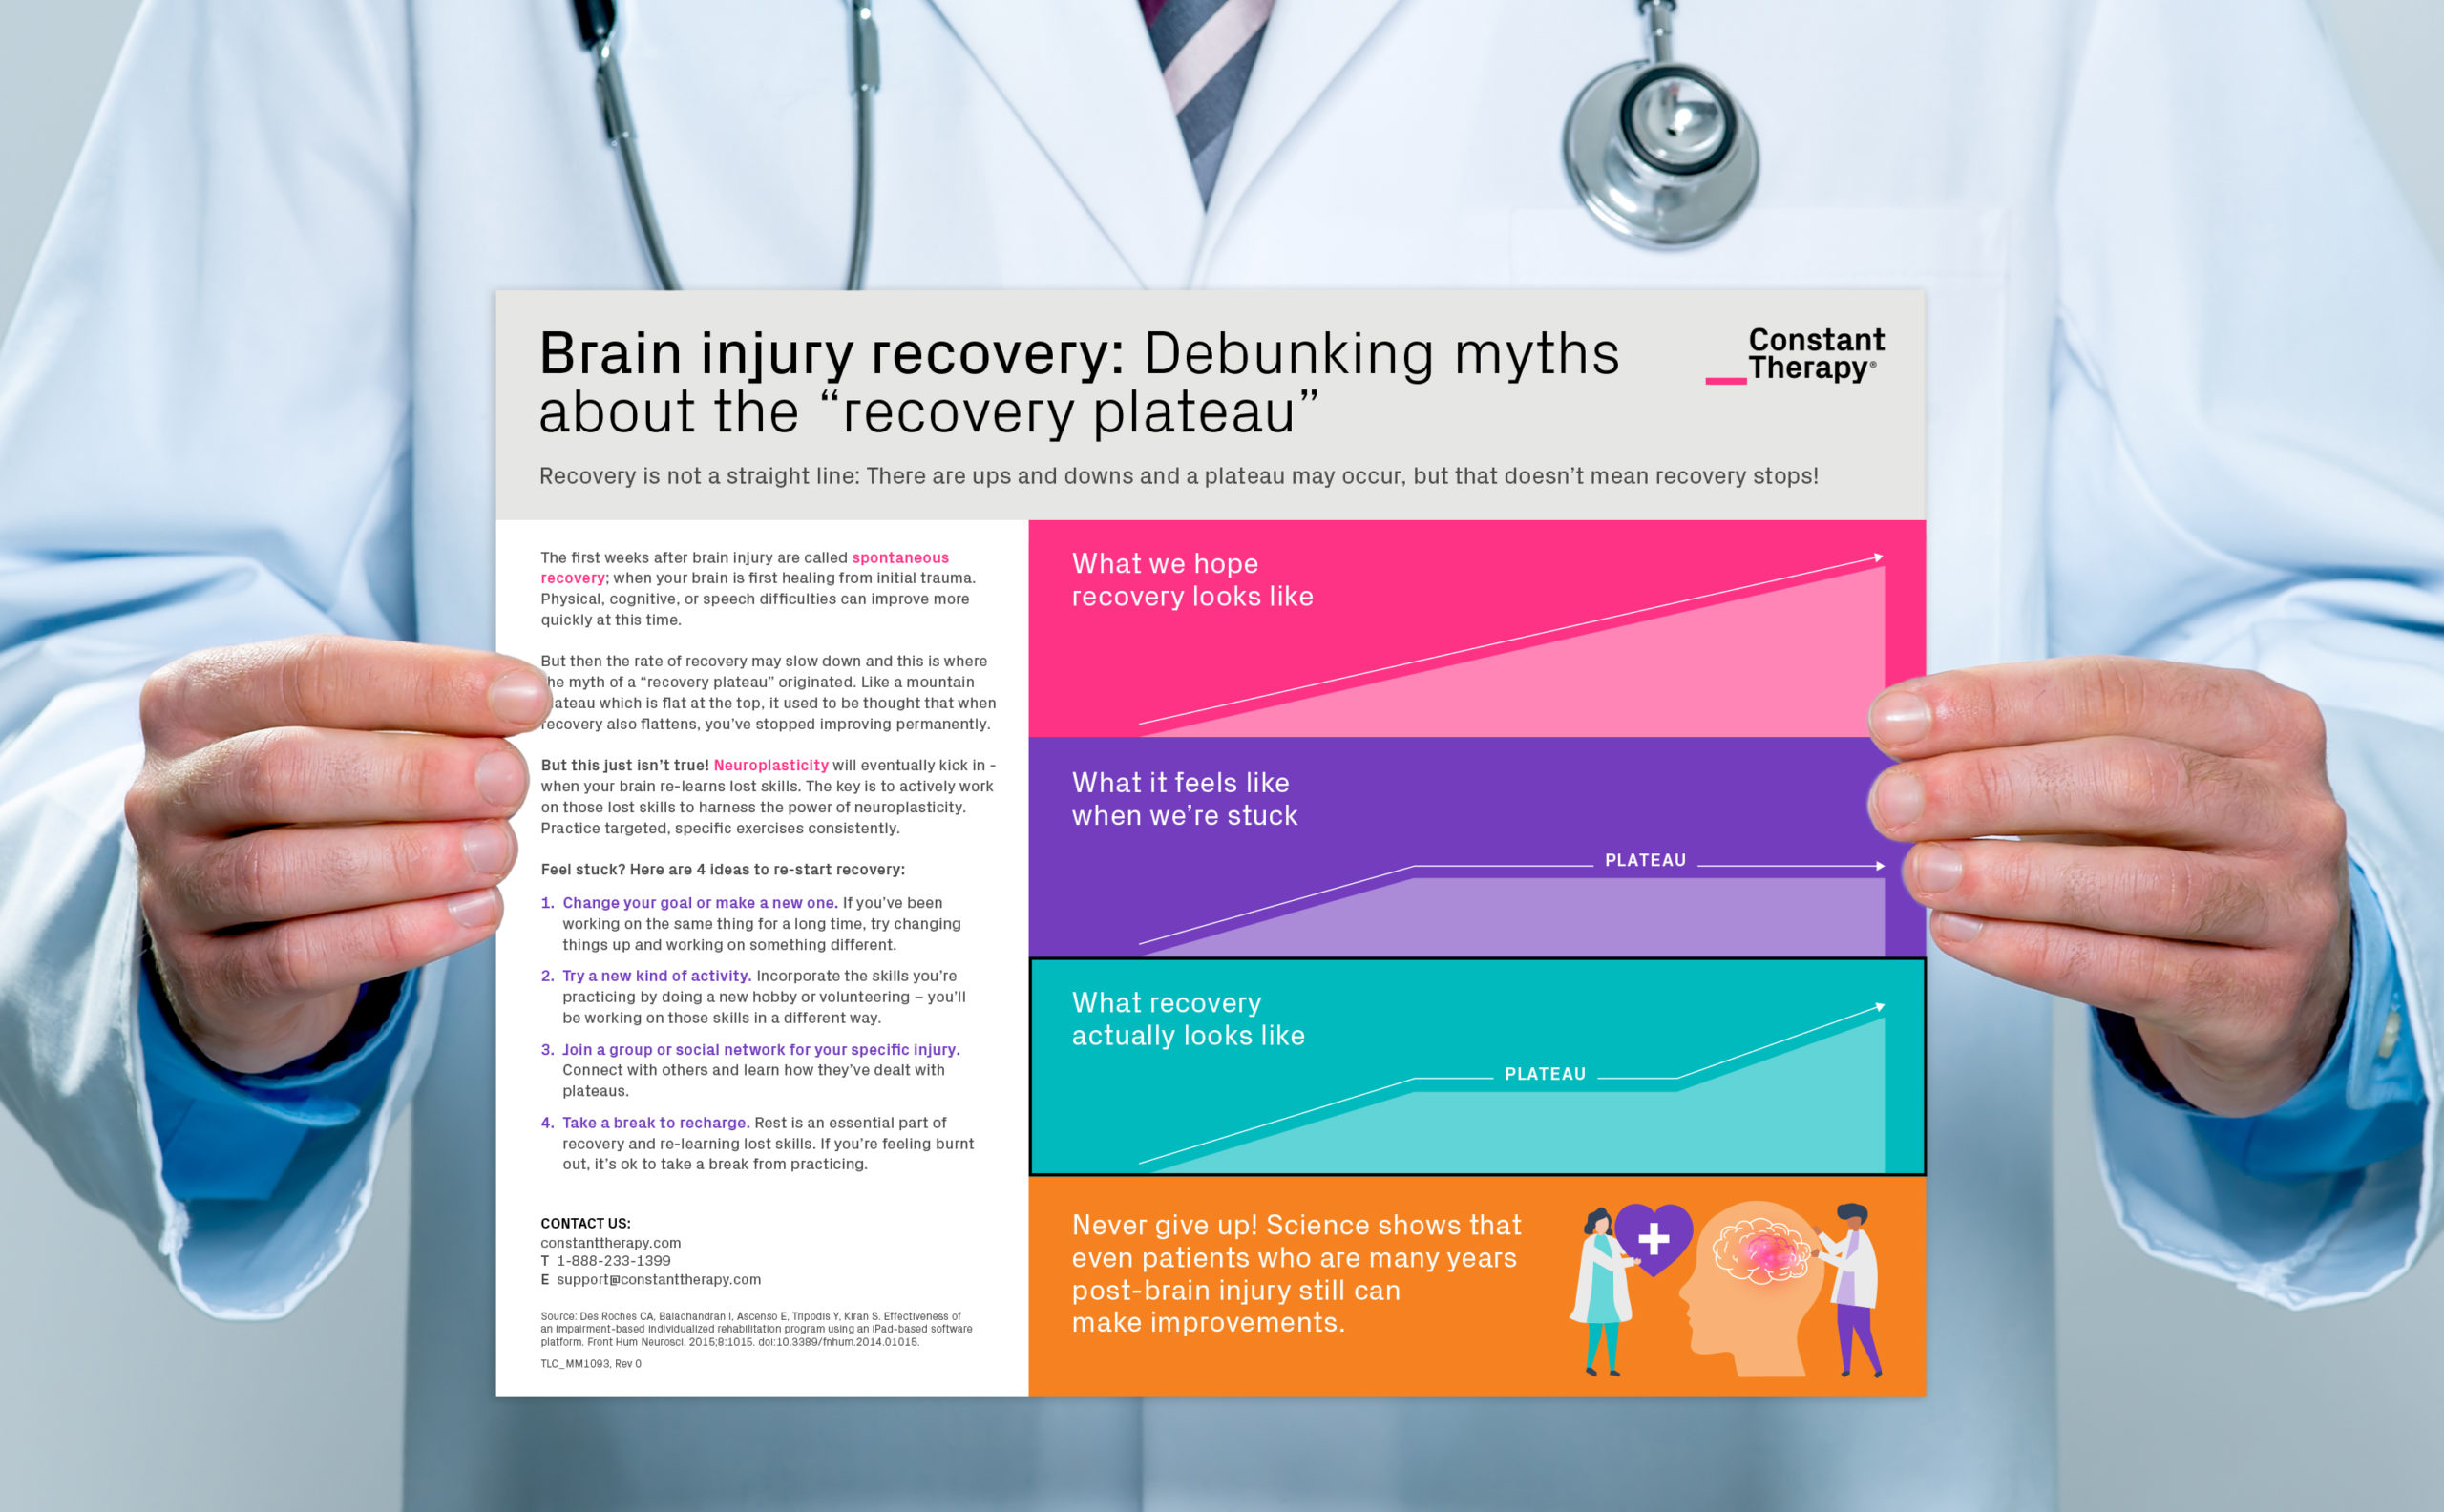 Plateau in Stroke Recovery: Is it true or a myth? How can you get